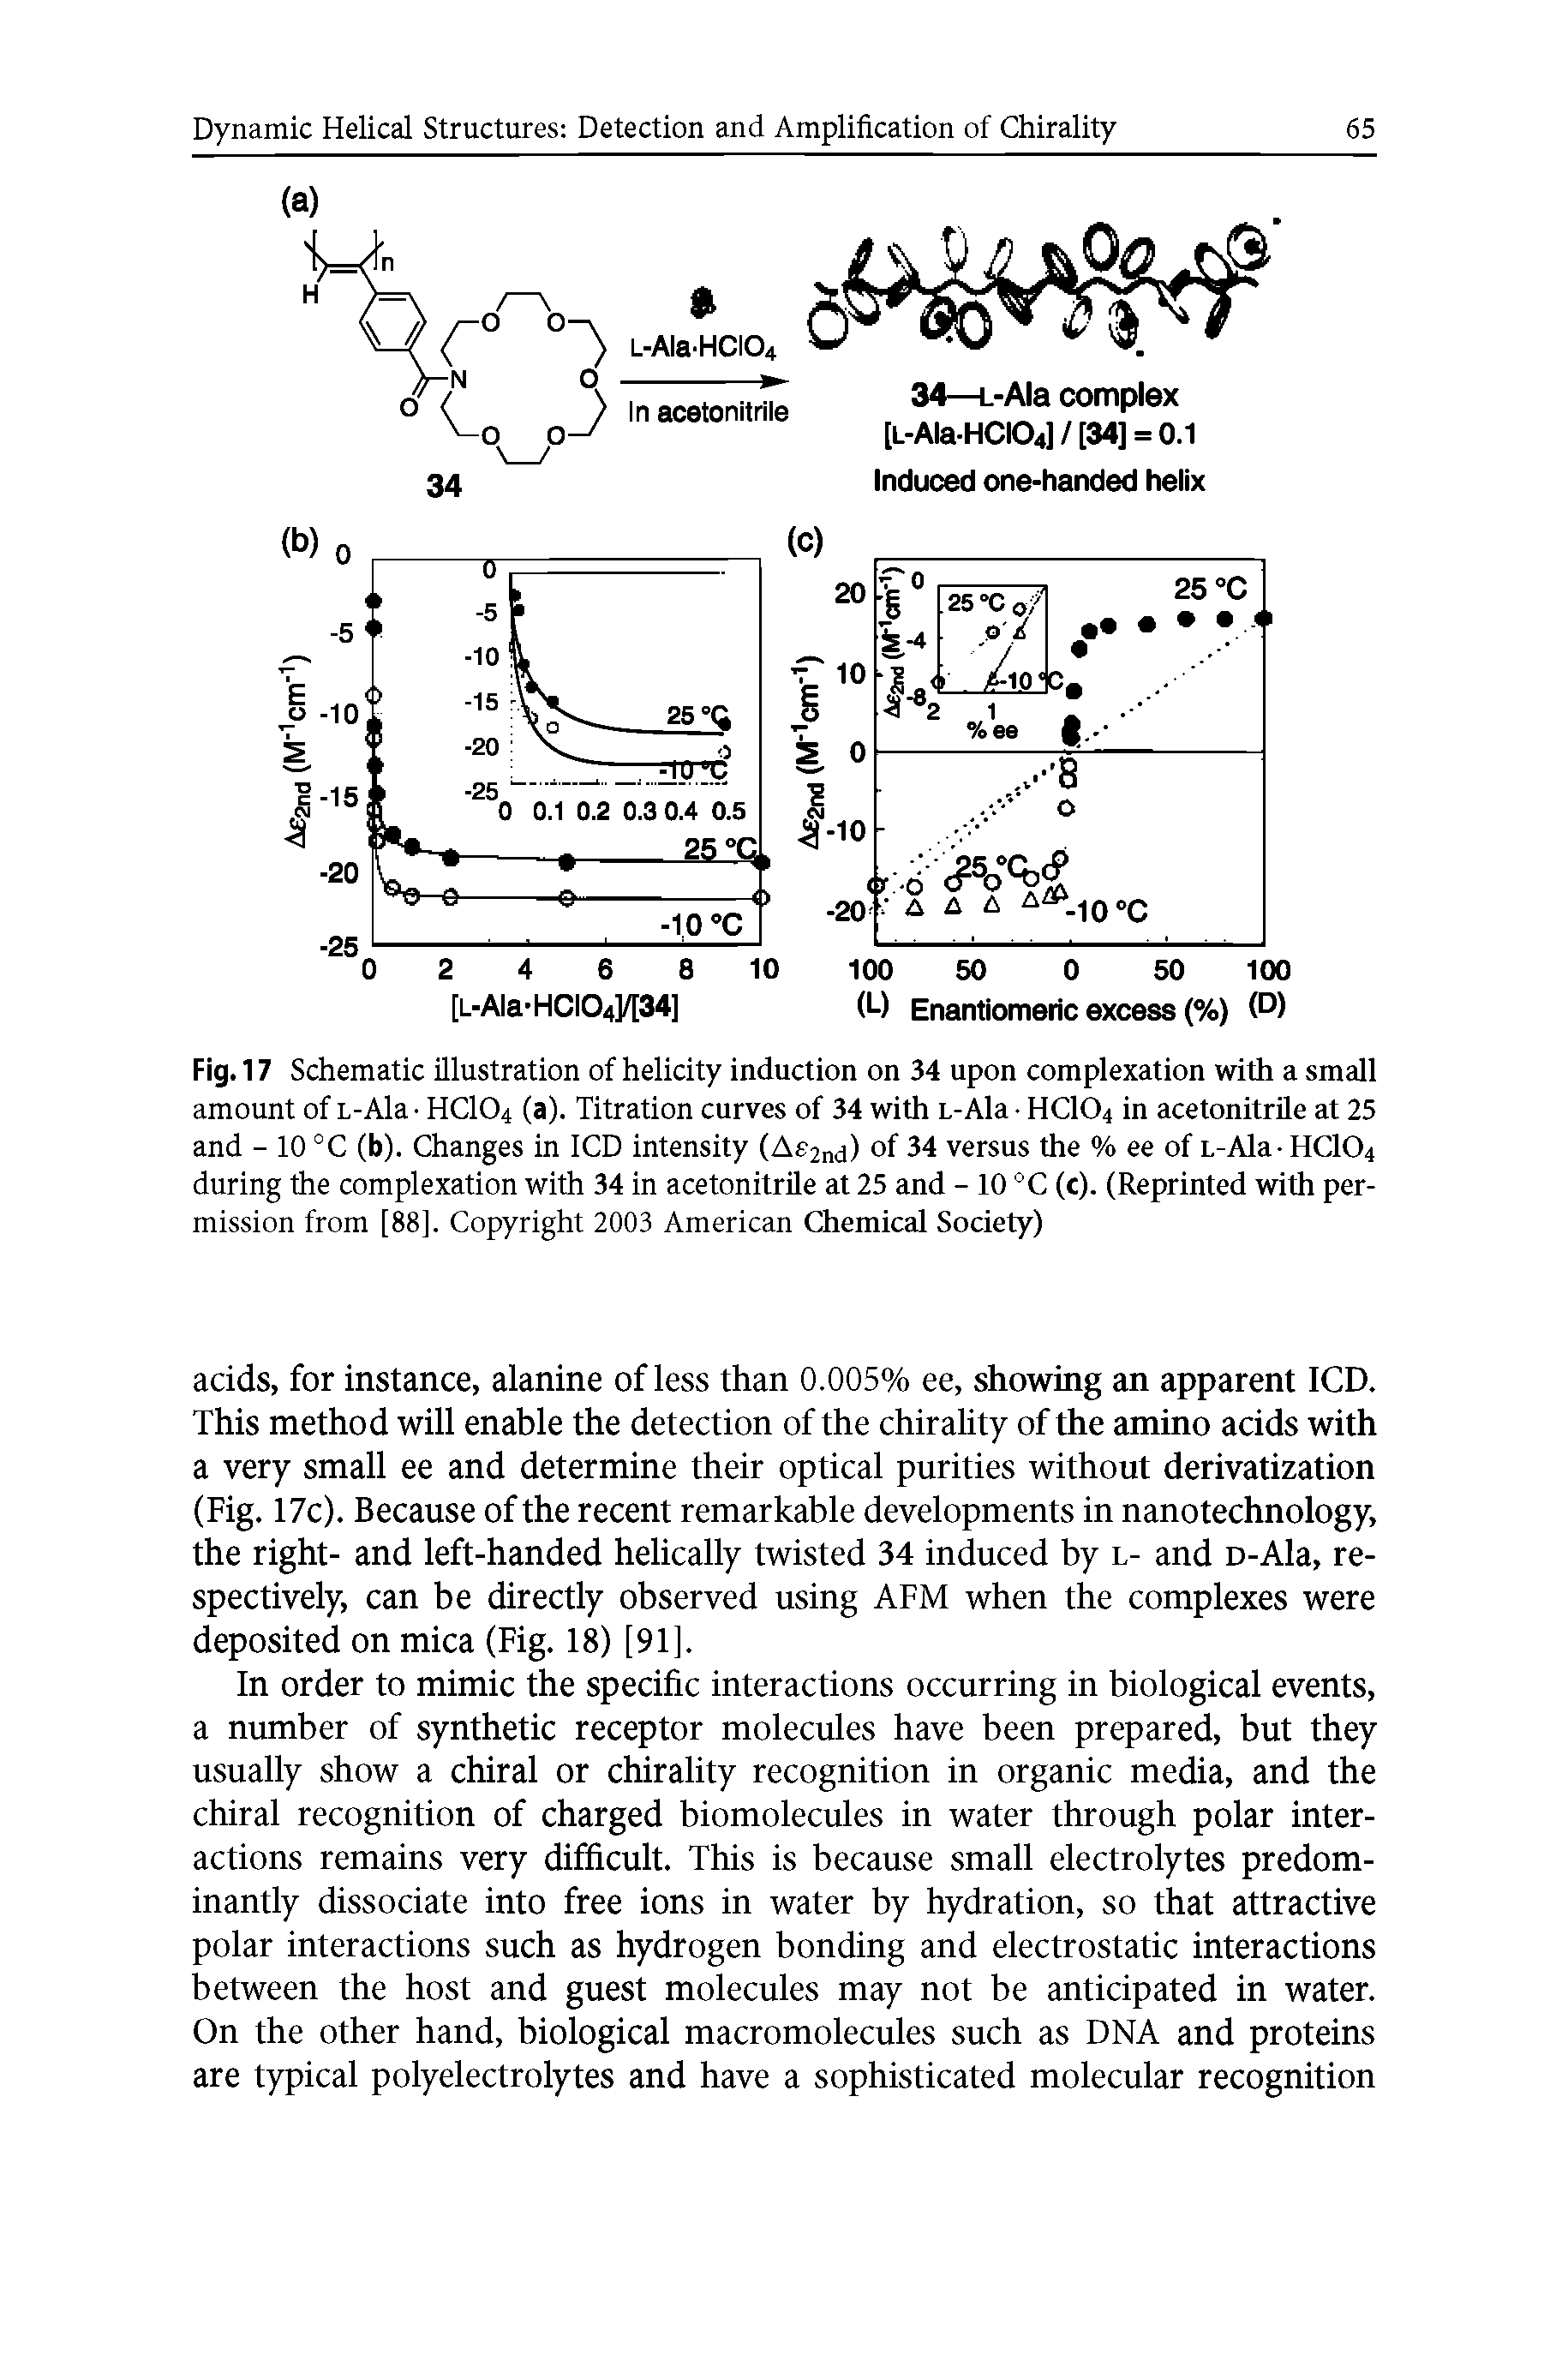 Fig. 17 Schematic illustration of helicity induction on 34 upon complexation with a small amount of L-Ala HCIO4 (a). Titration curves of 34 with L-Ala HCIO4 in acetonitrile at 25 and - 10 °C (b). Changes in ICD intensity (Ae2nd) of 34 versus the % ee of L-Ala- HC104 during the complexation with 34 in acetonitrile at 25 and - 10 °C (c). (Reprinted with permission from [88], Copyright 2003 American Chemical Society)...